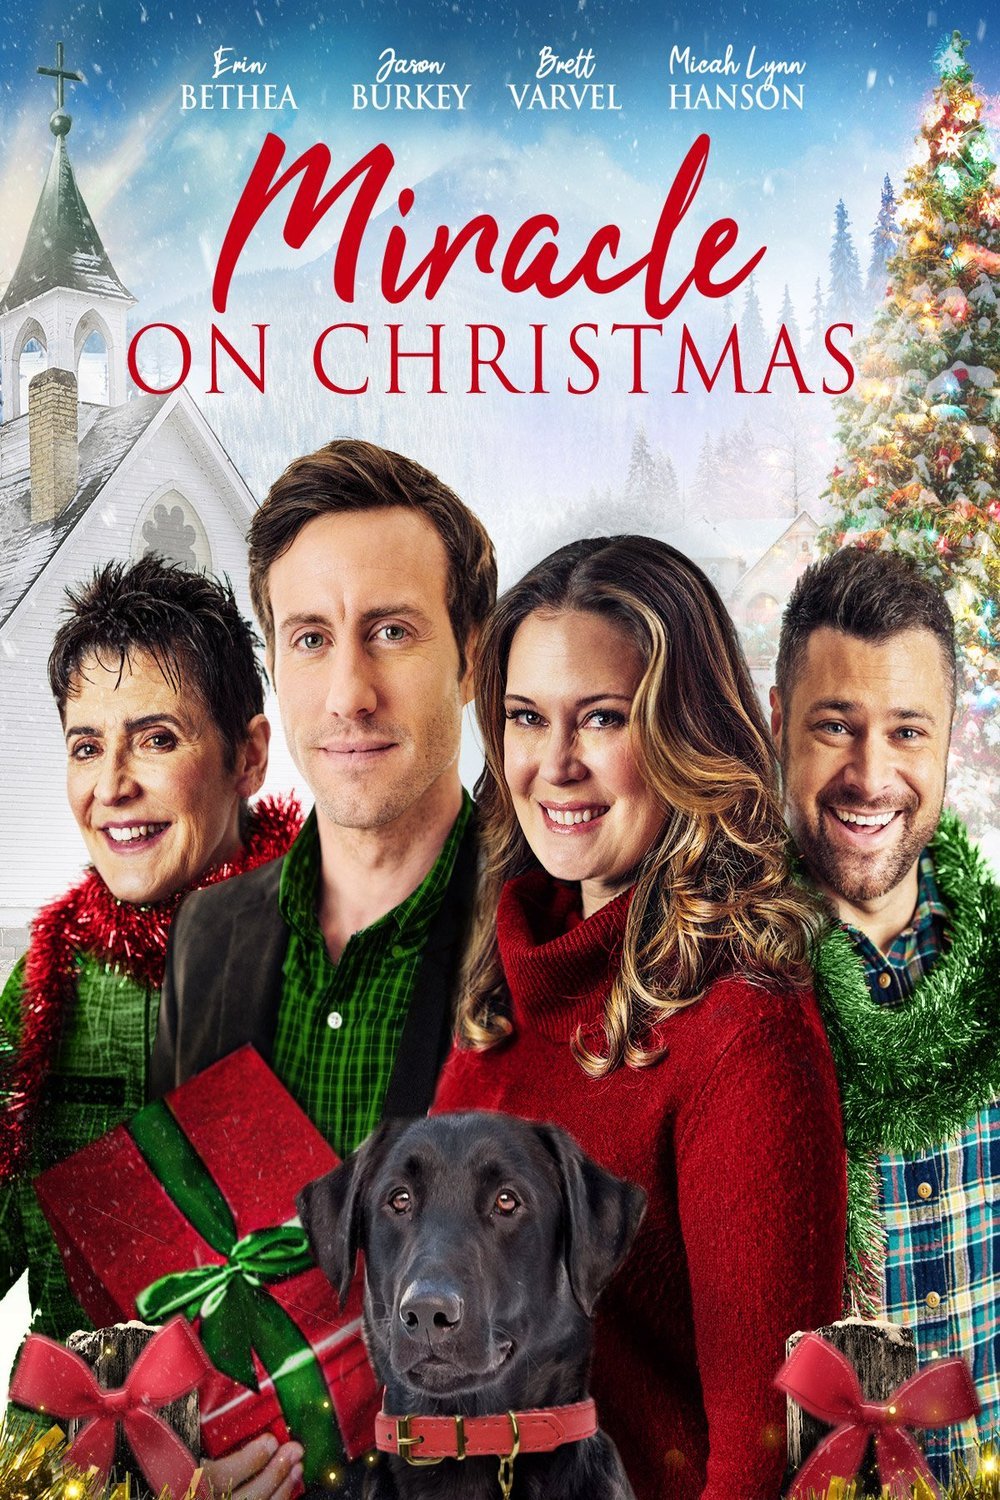 Poster of the movie Miracle on Christmas